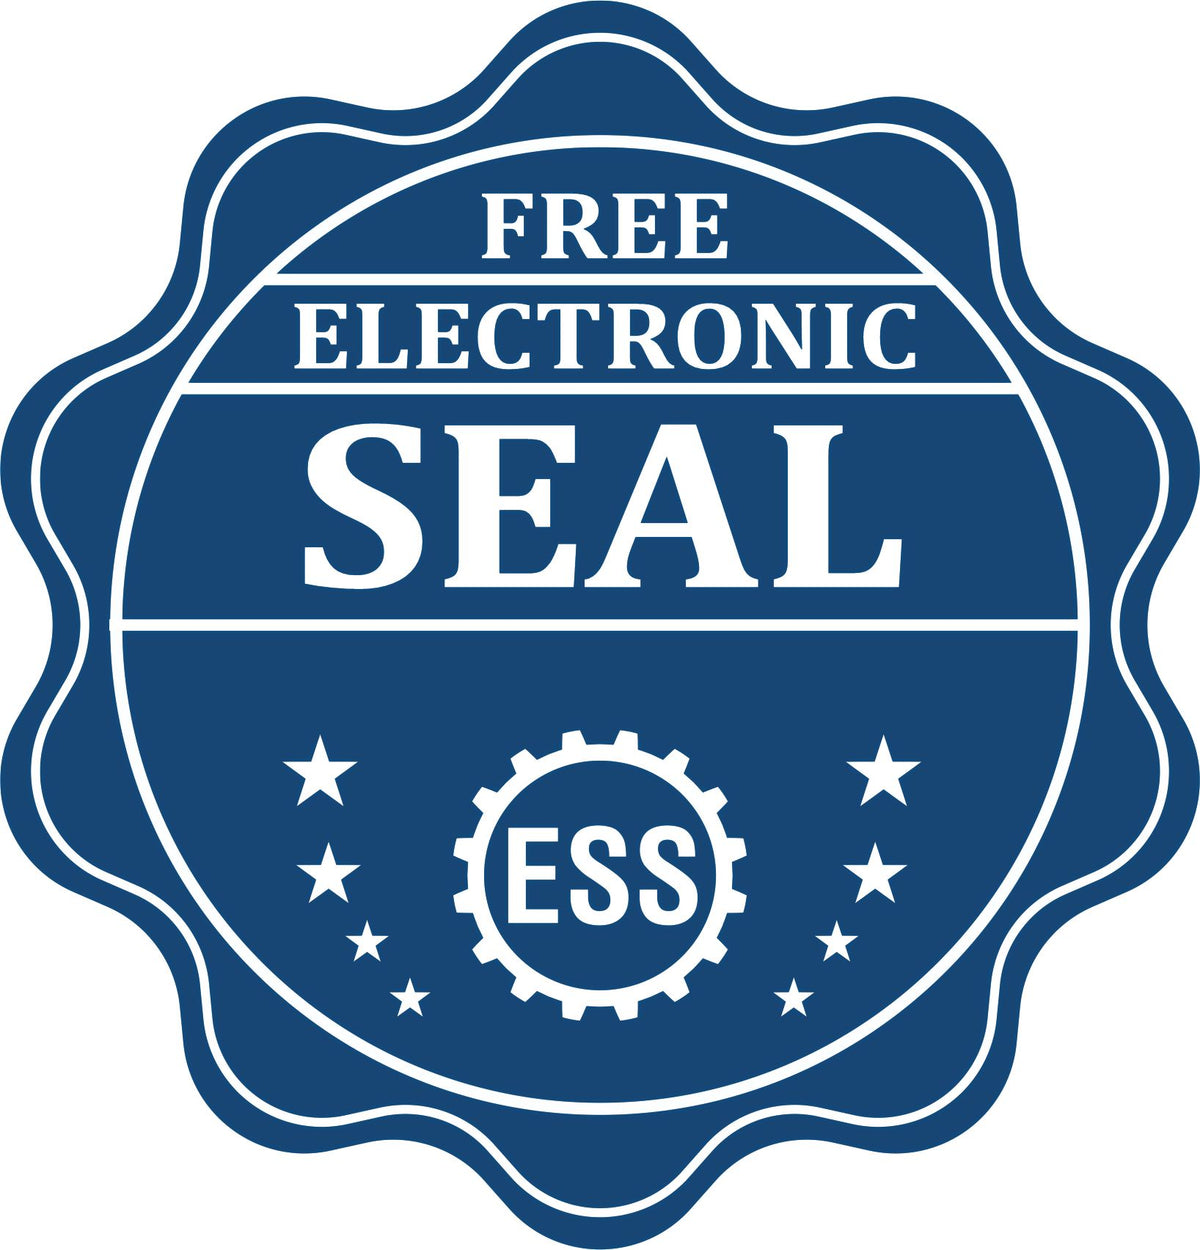 A badge showing a free electronic seal for the Handheld Montana Land Surveyor Seal with stars and the ESS gear on the emblem.